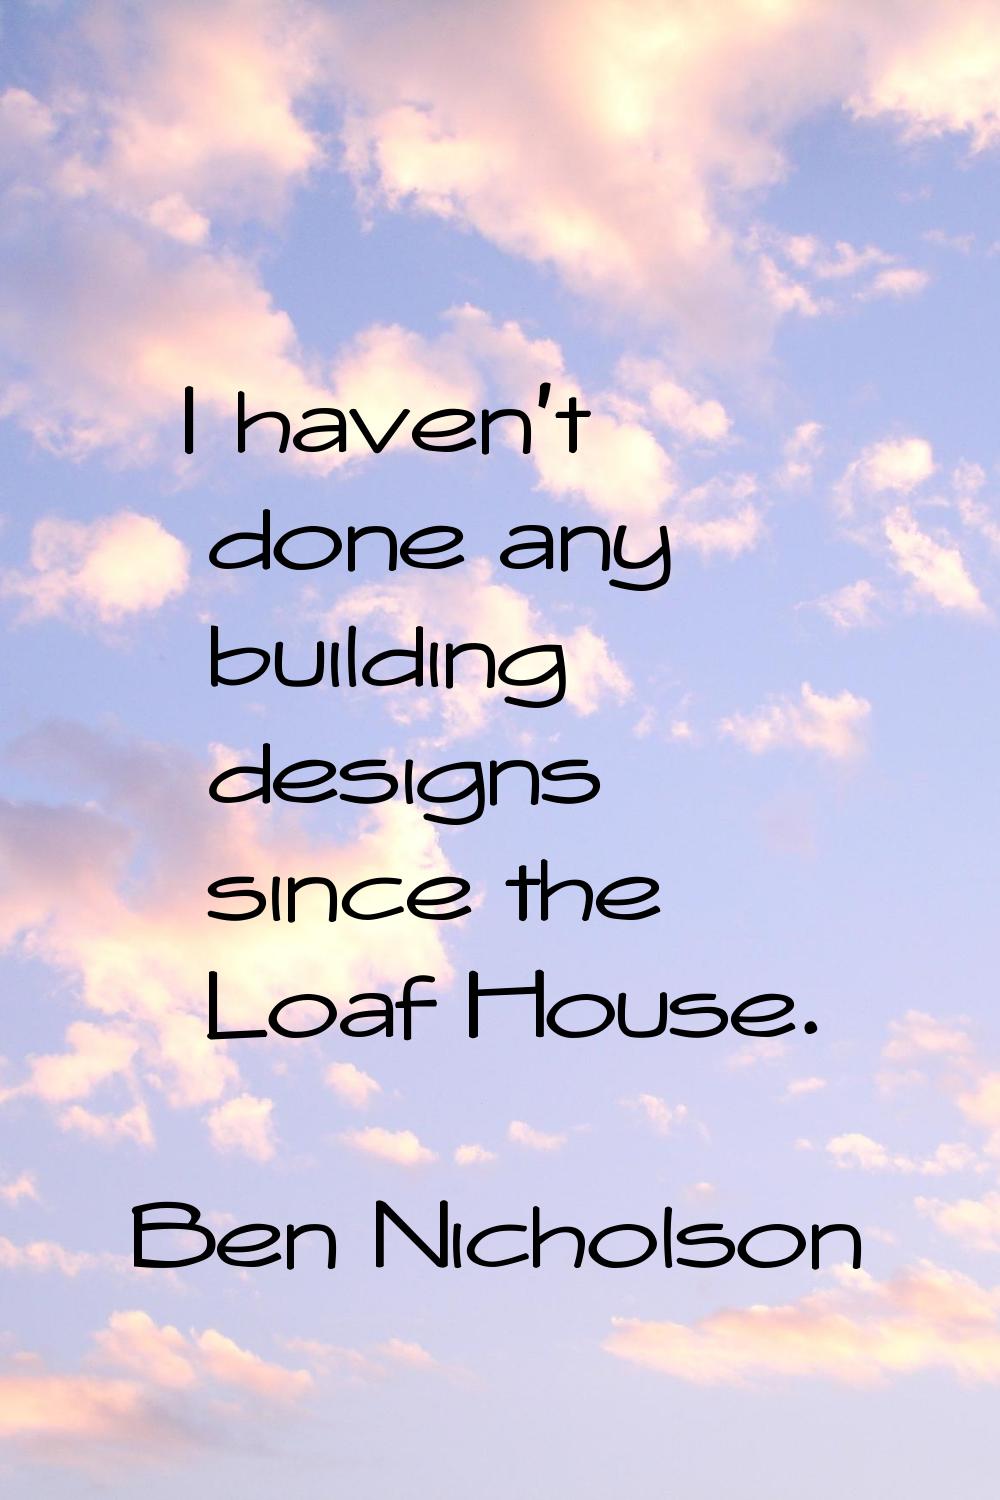 I haven't done any building designs since the Loaf House.